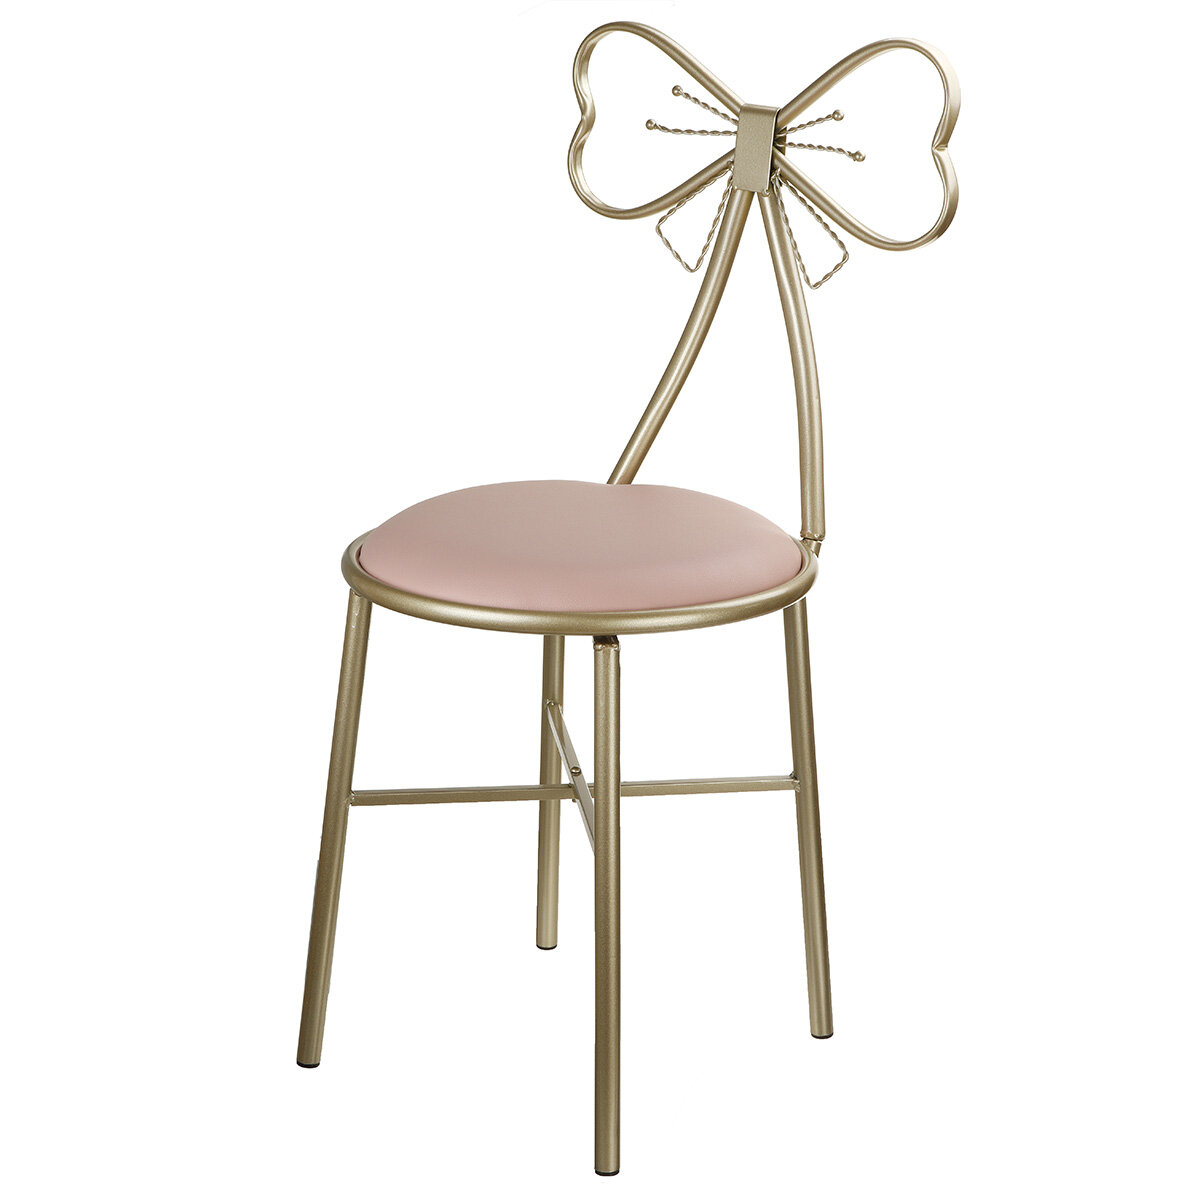 

Vanity Stool Butterfly Backrest Wrought Iron PU Leather Makeup Stool Chair Super Soft Princess Dressing Stool Chair for